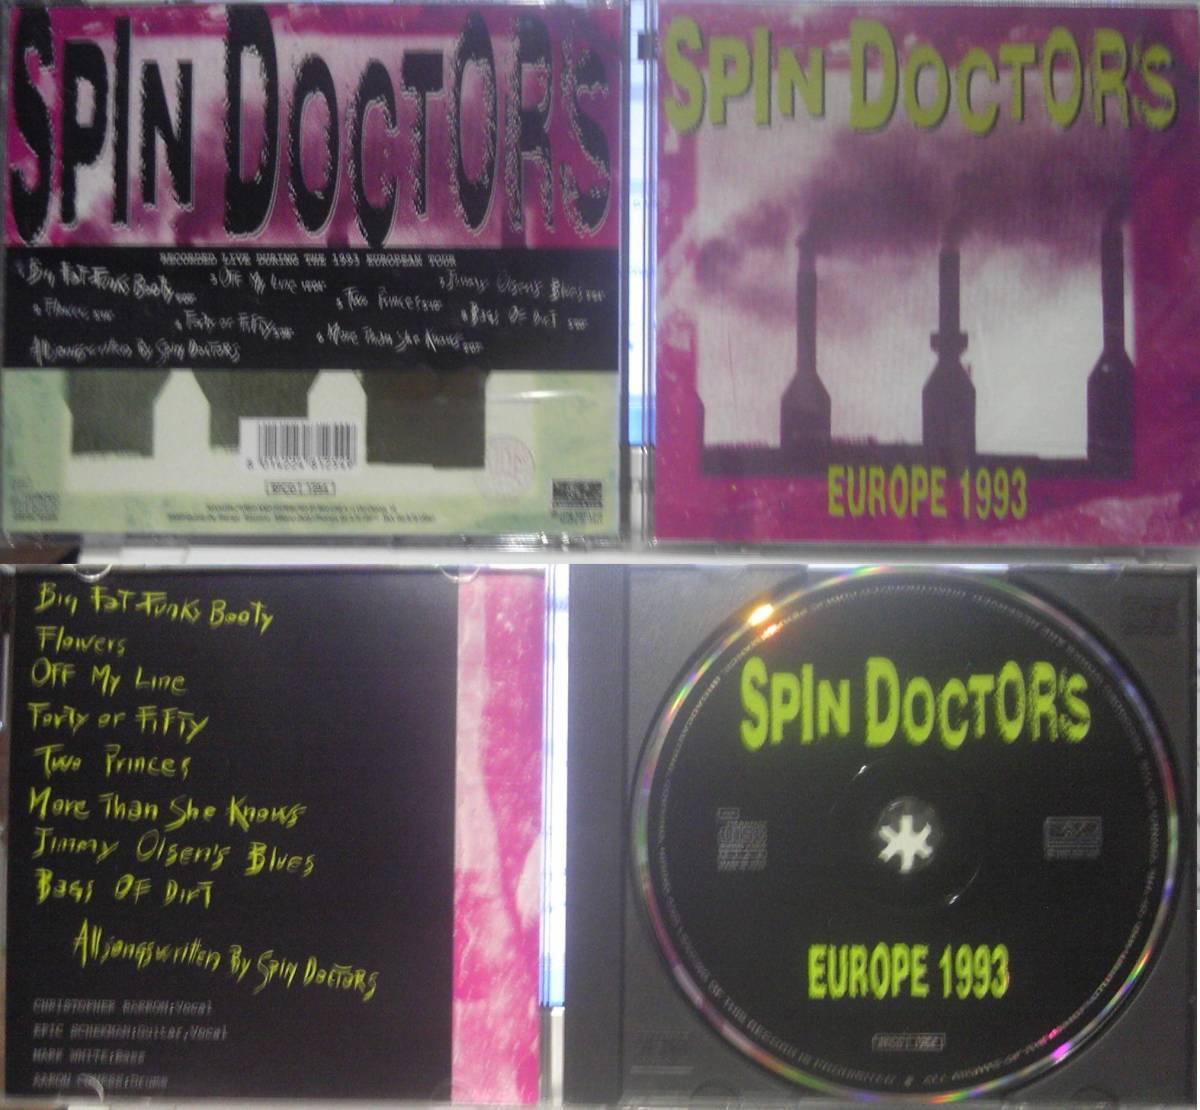 SPIN DOCTORS U.S.A. 1993＆ROUND AND ROUND (2CD)＆EUROPE 1993＆HERE COMES THE BRIDE_画像4